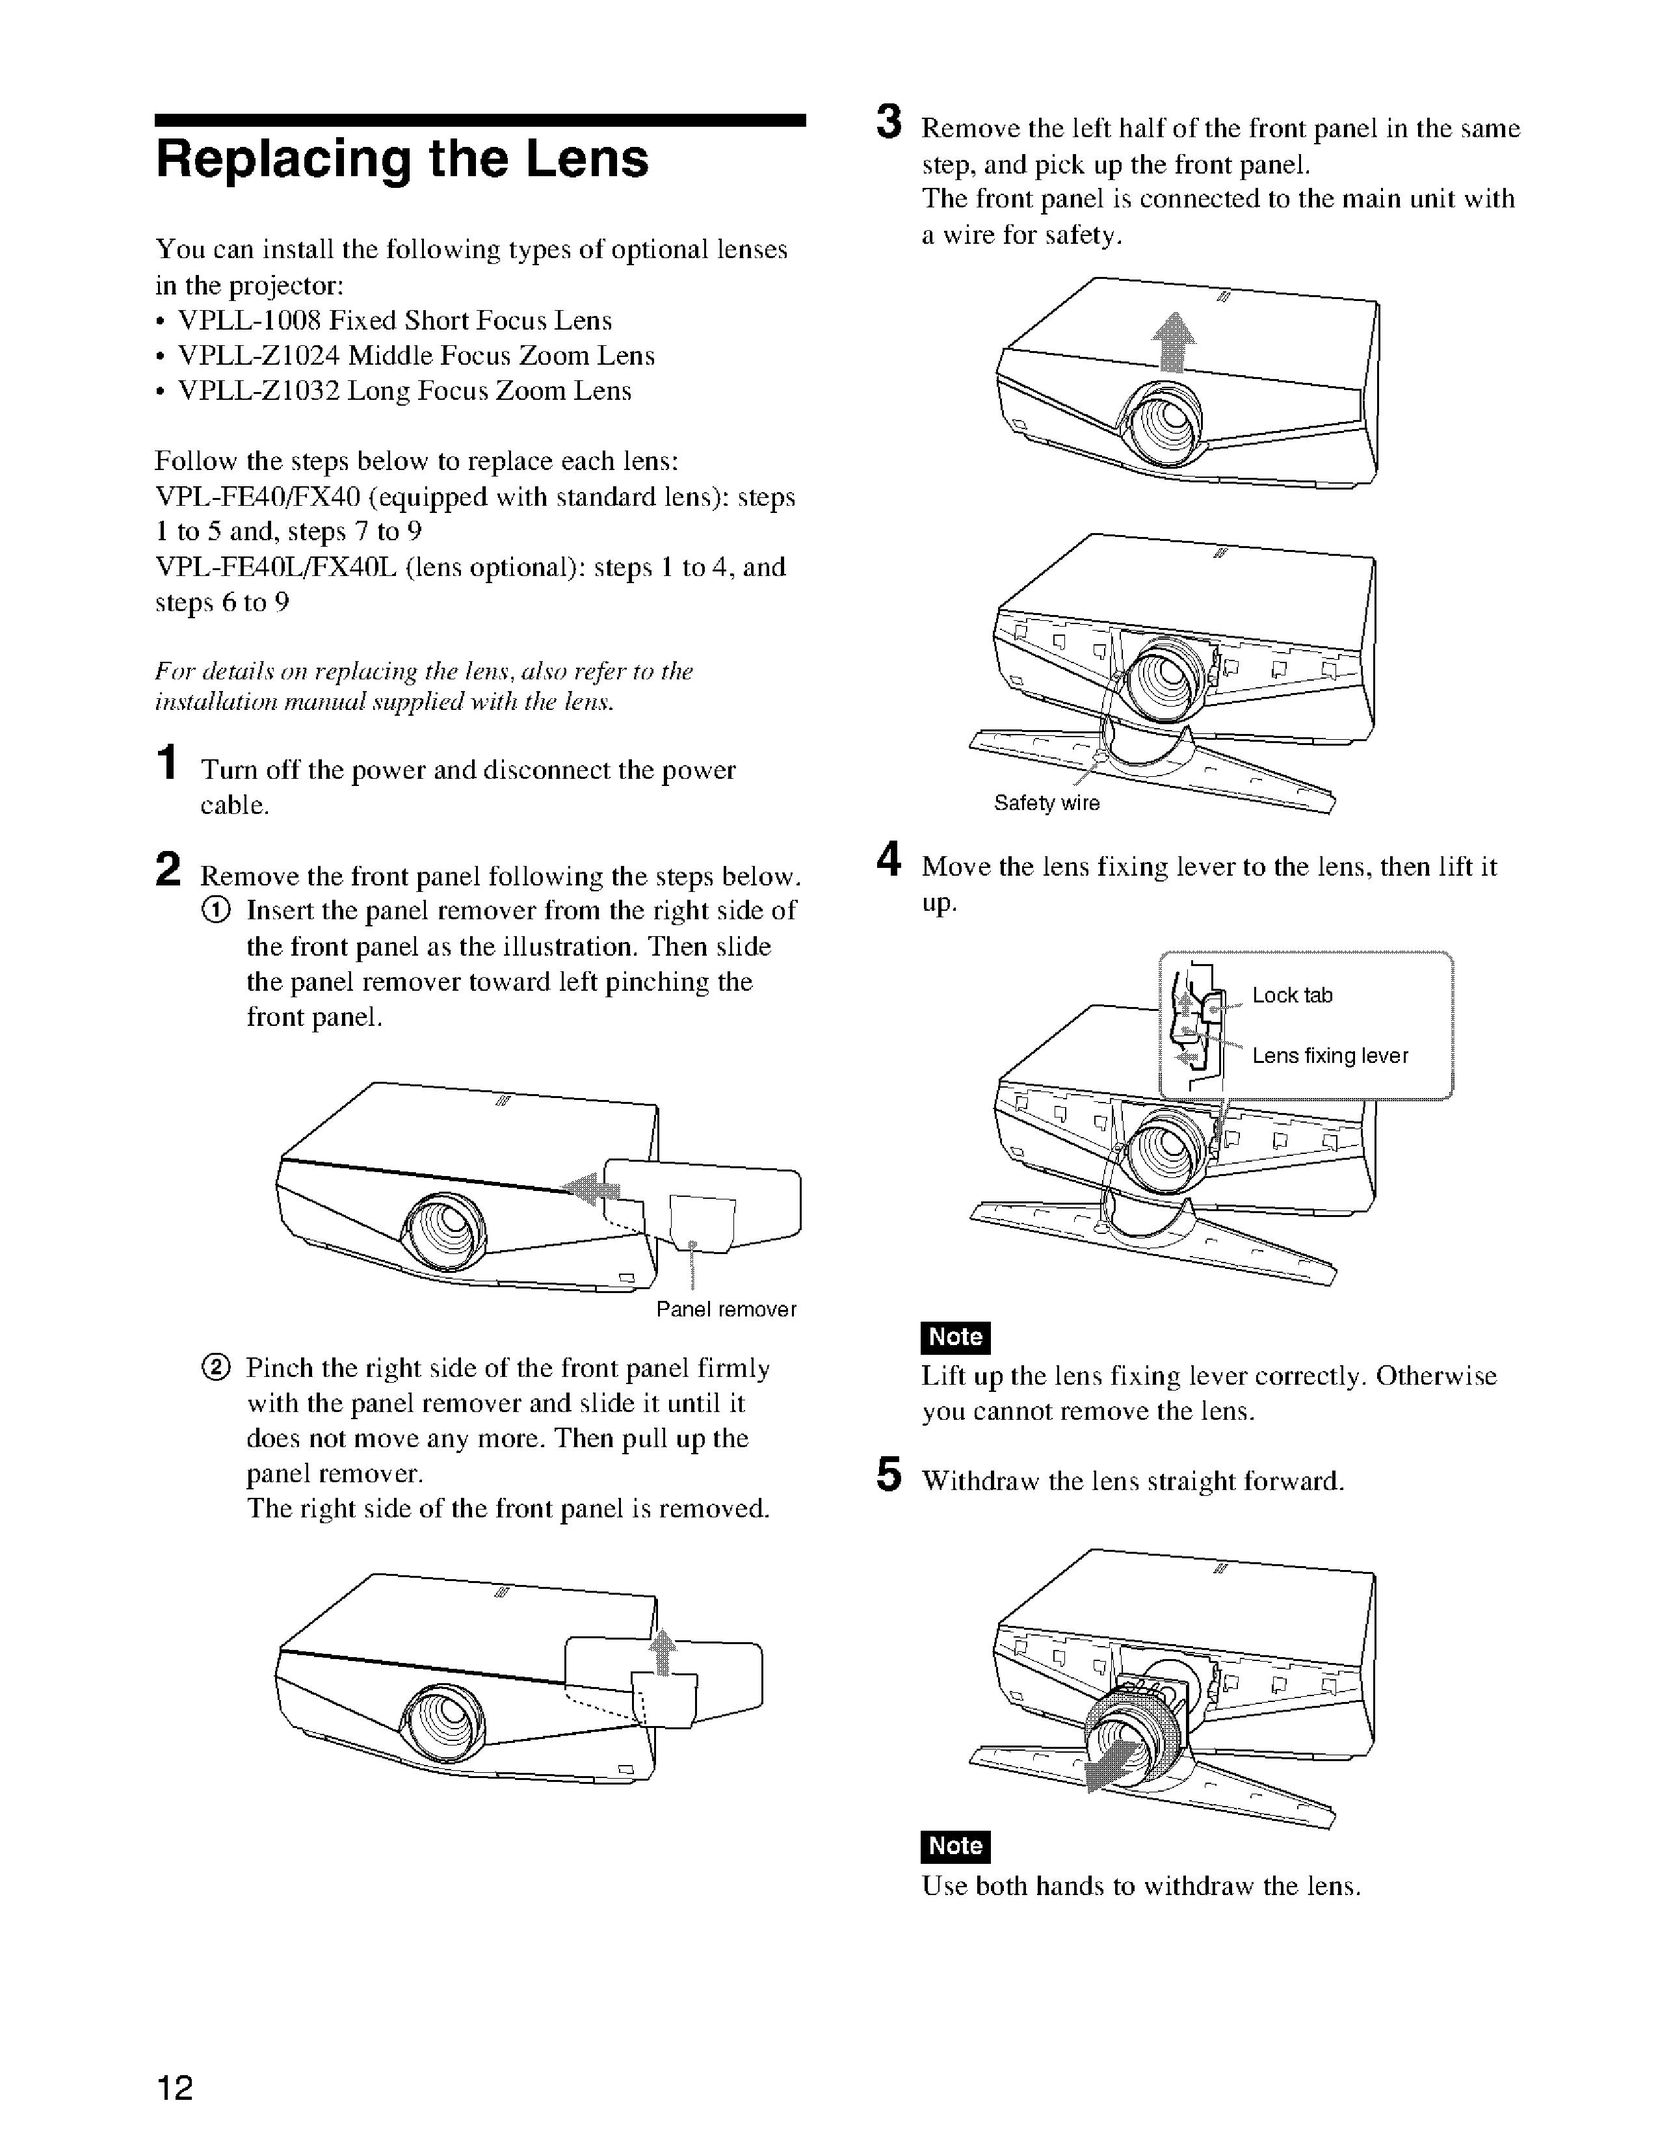 Sony VPLL-Z1024 Projector Accessories User Manual